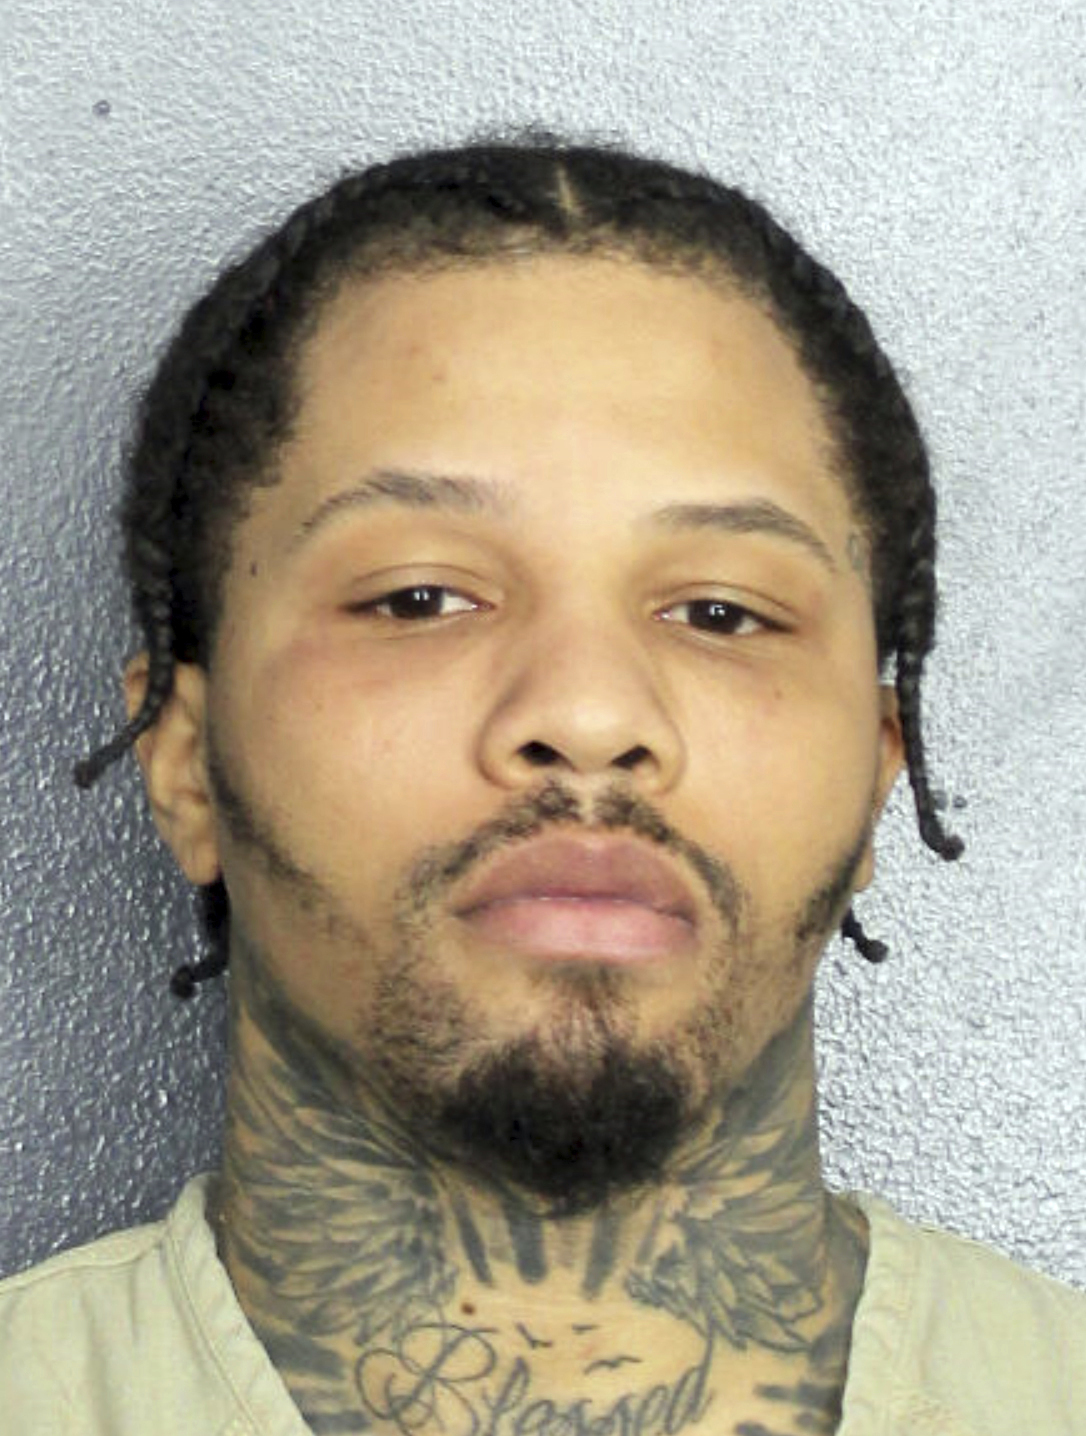 This booking image provided by the Broward County Sheriff's Office shows professional boxer lt;HIT gt;Gervonta lt;/HIT gt; Davis, who has been jailed in Florida after he struck a woman in the face, authorities said Wednesday, Dec. 28, 2022. (Broward County Sheriff's Office via AP)